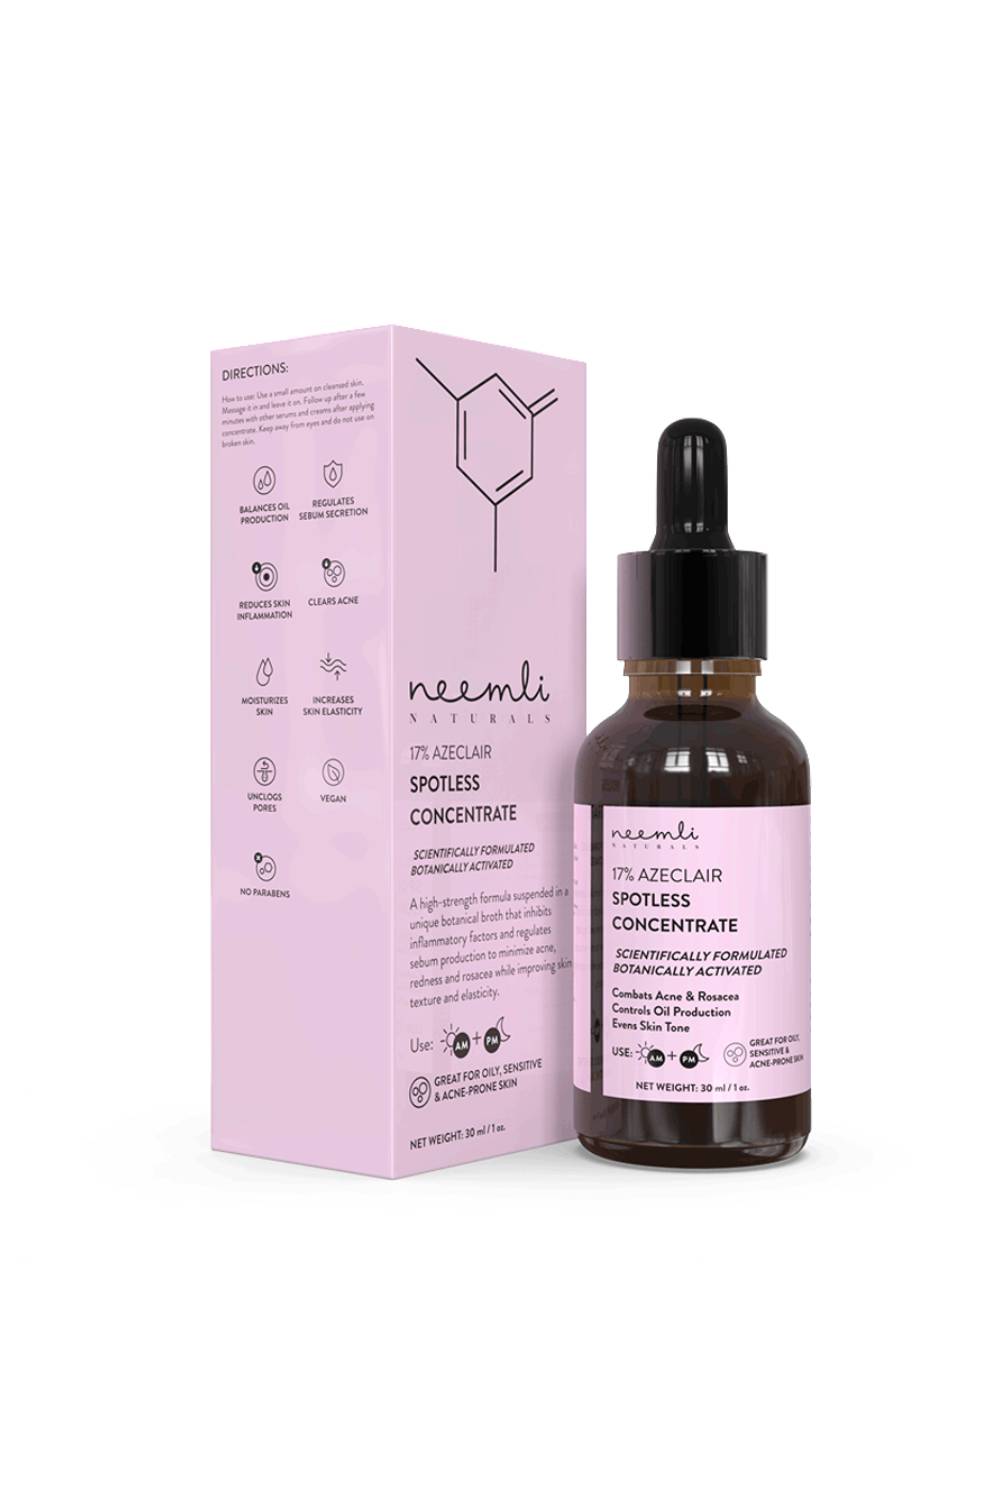 17% Azeclair  Spotless Concentrate-30ml